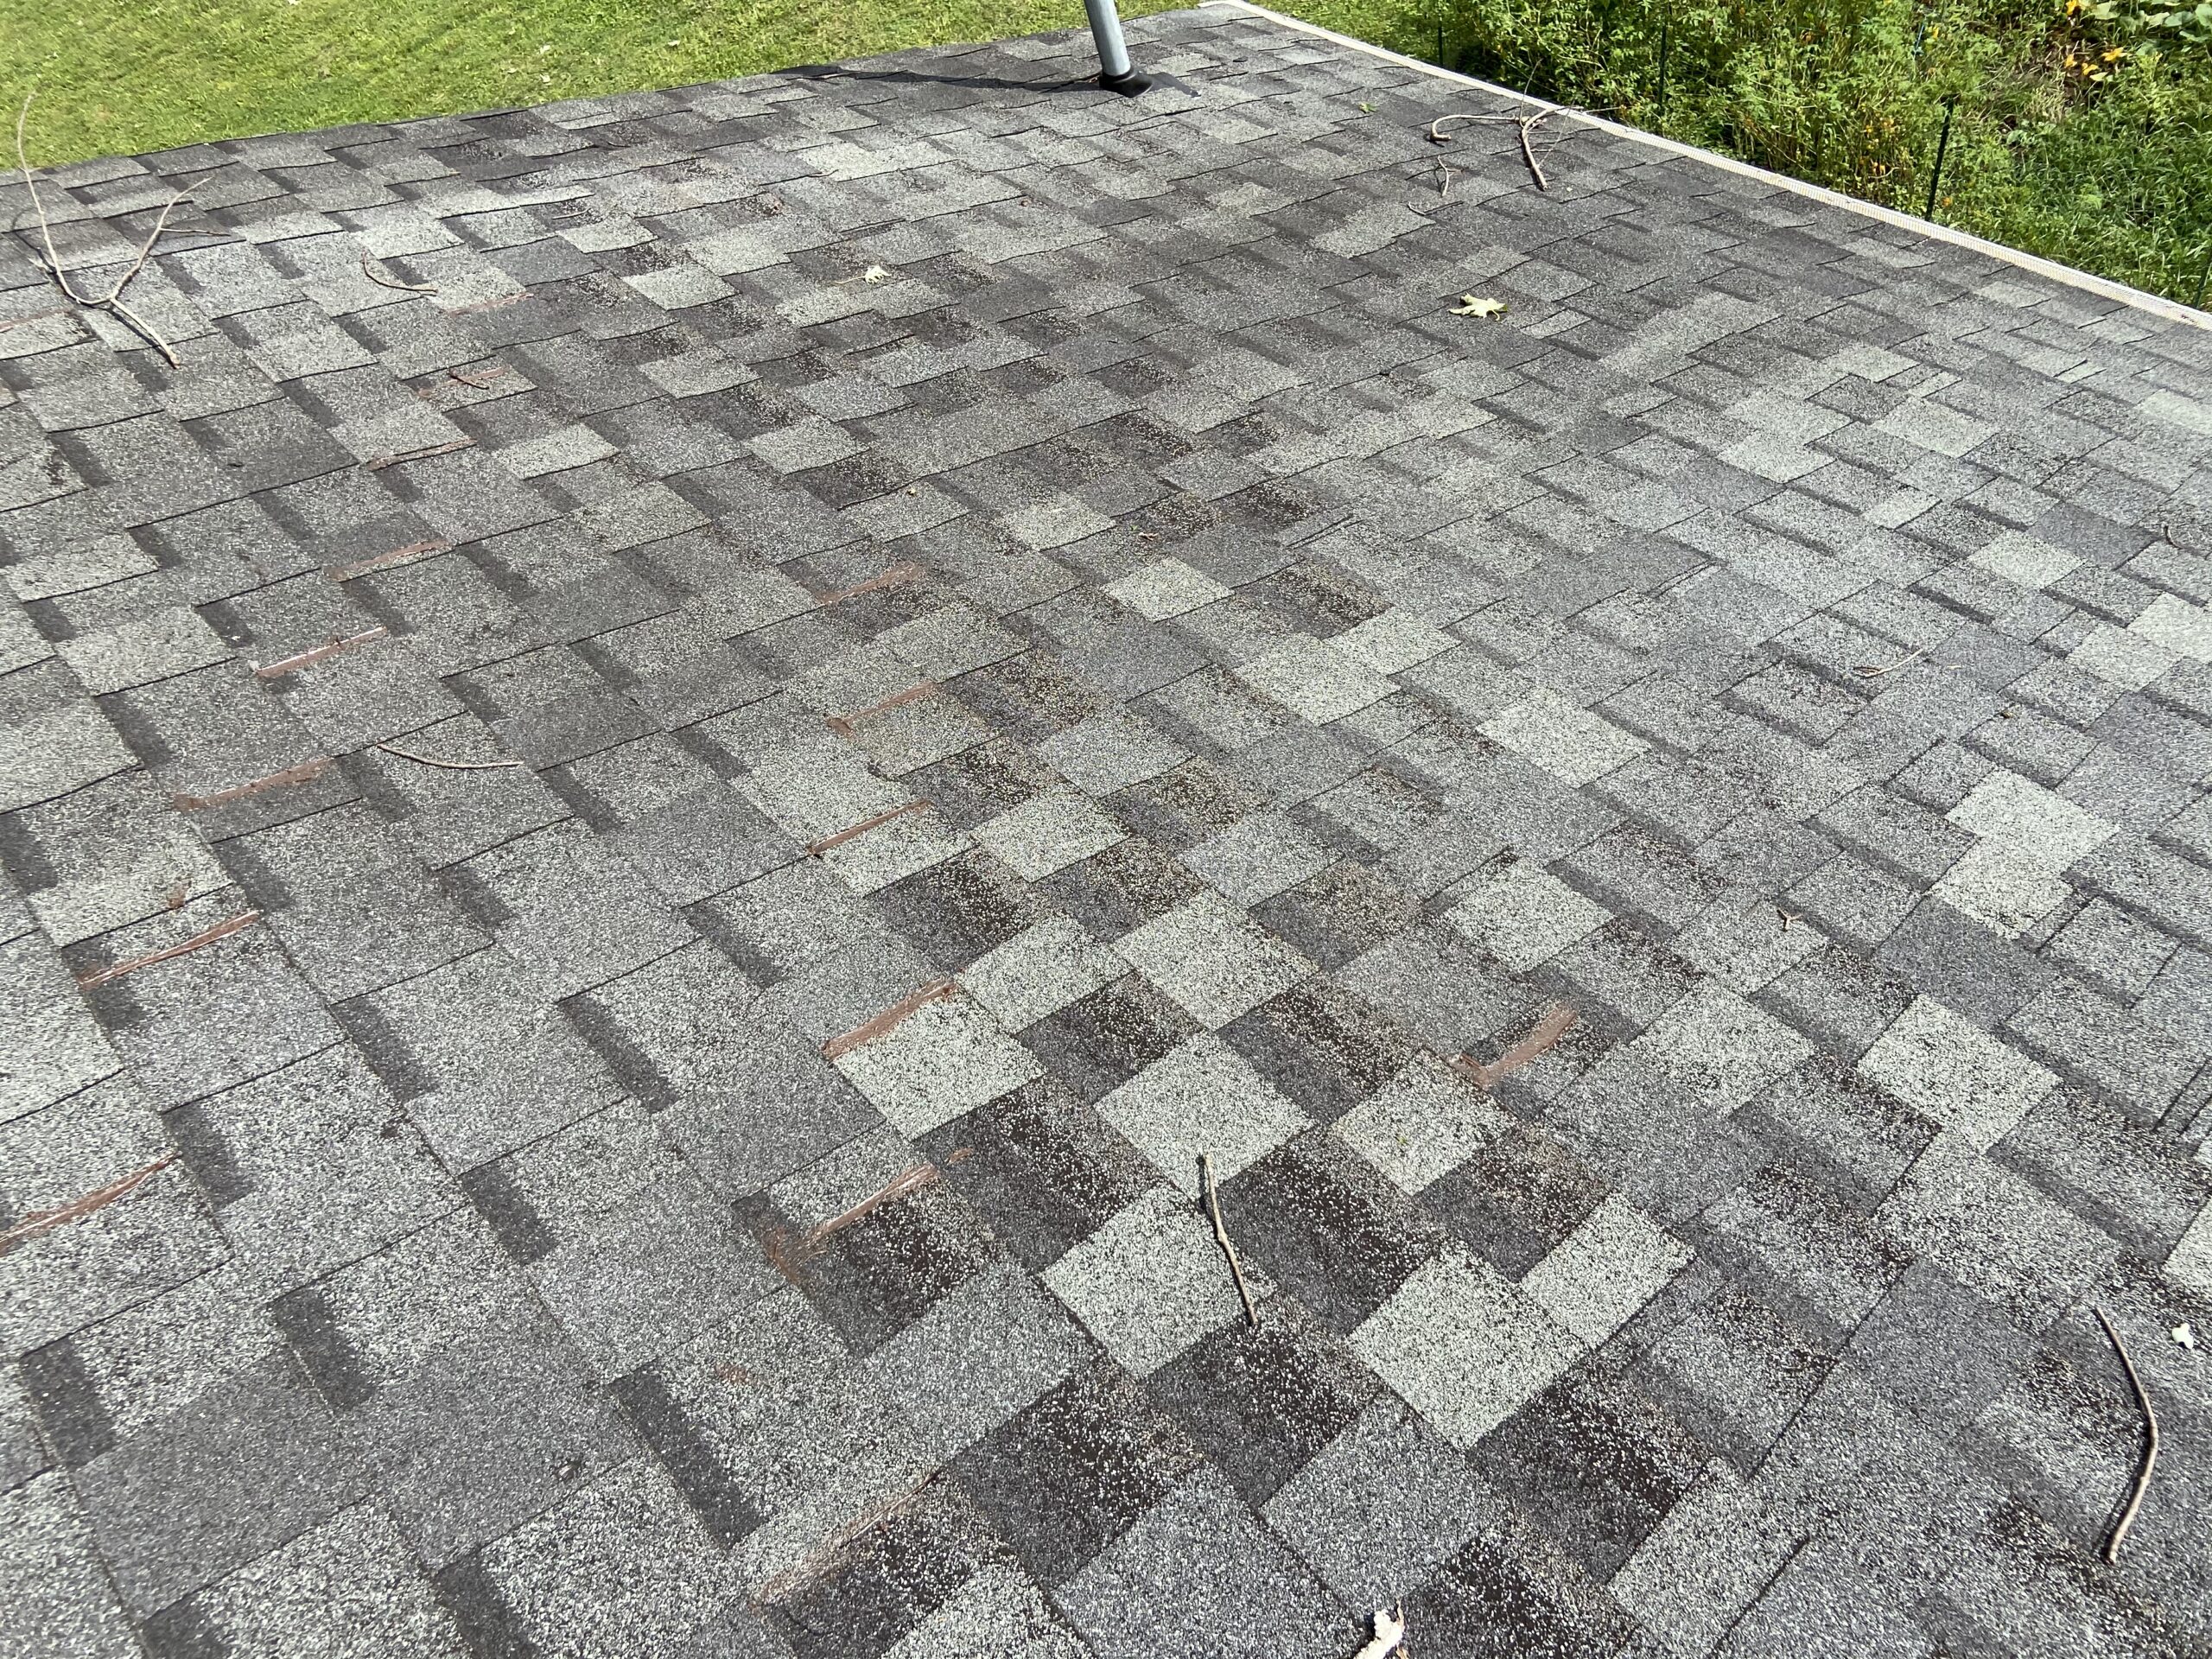 picture of shingles on a roof that are grey in color and worn out